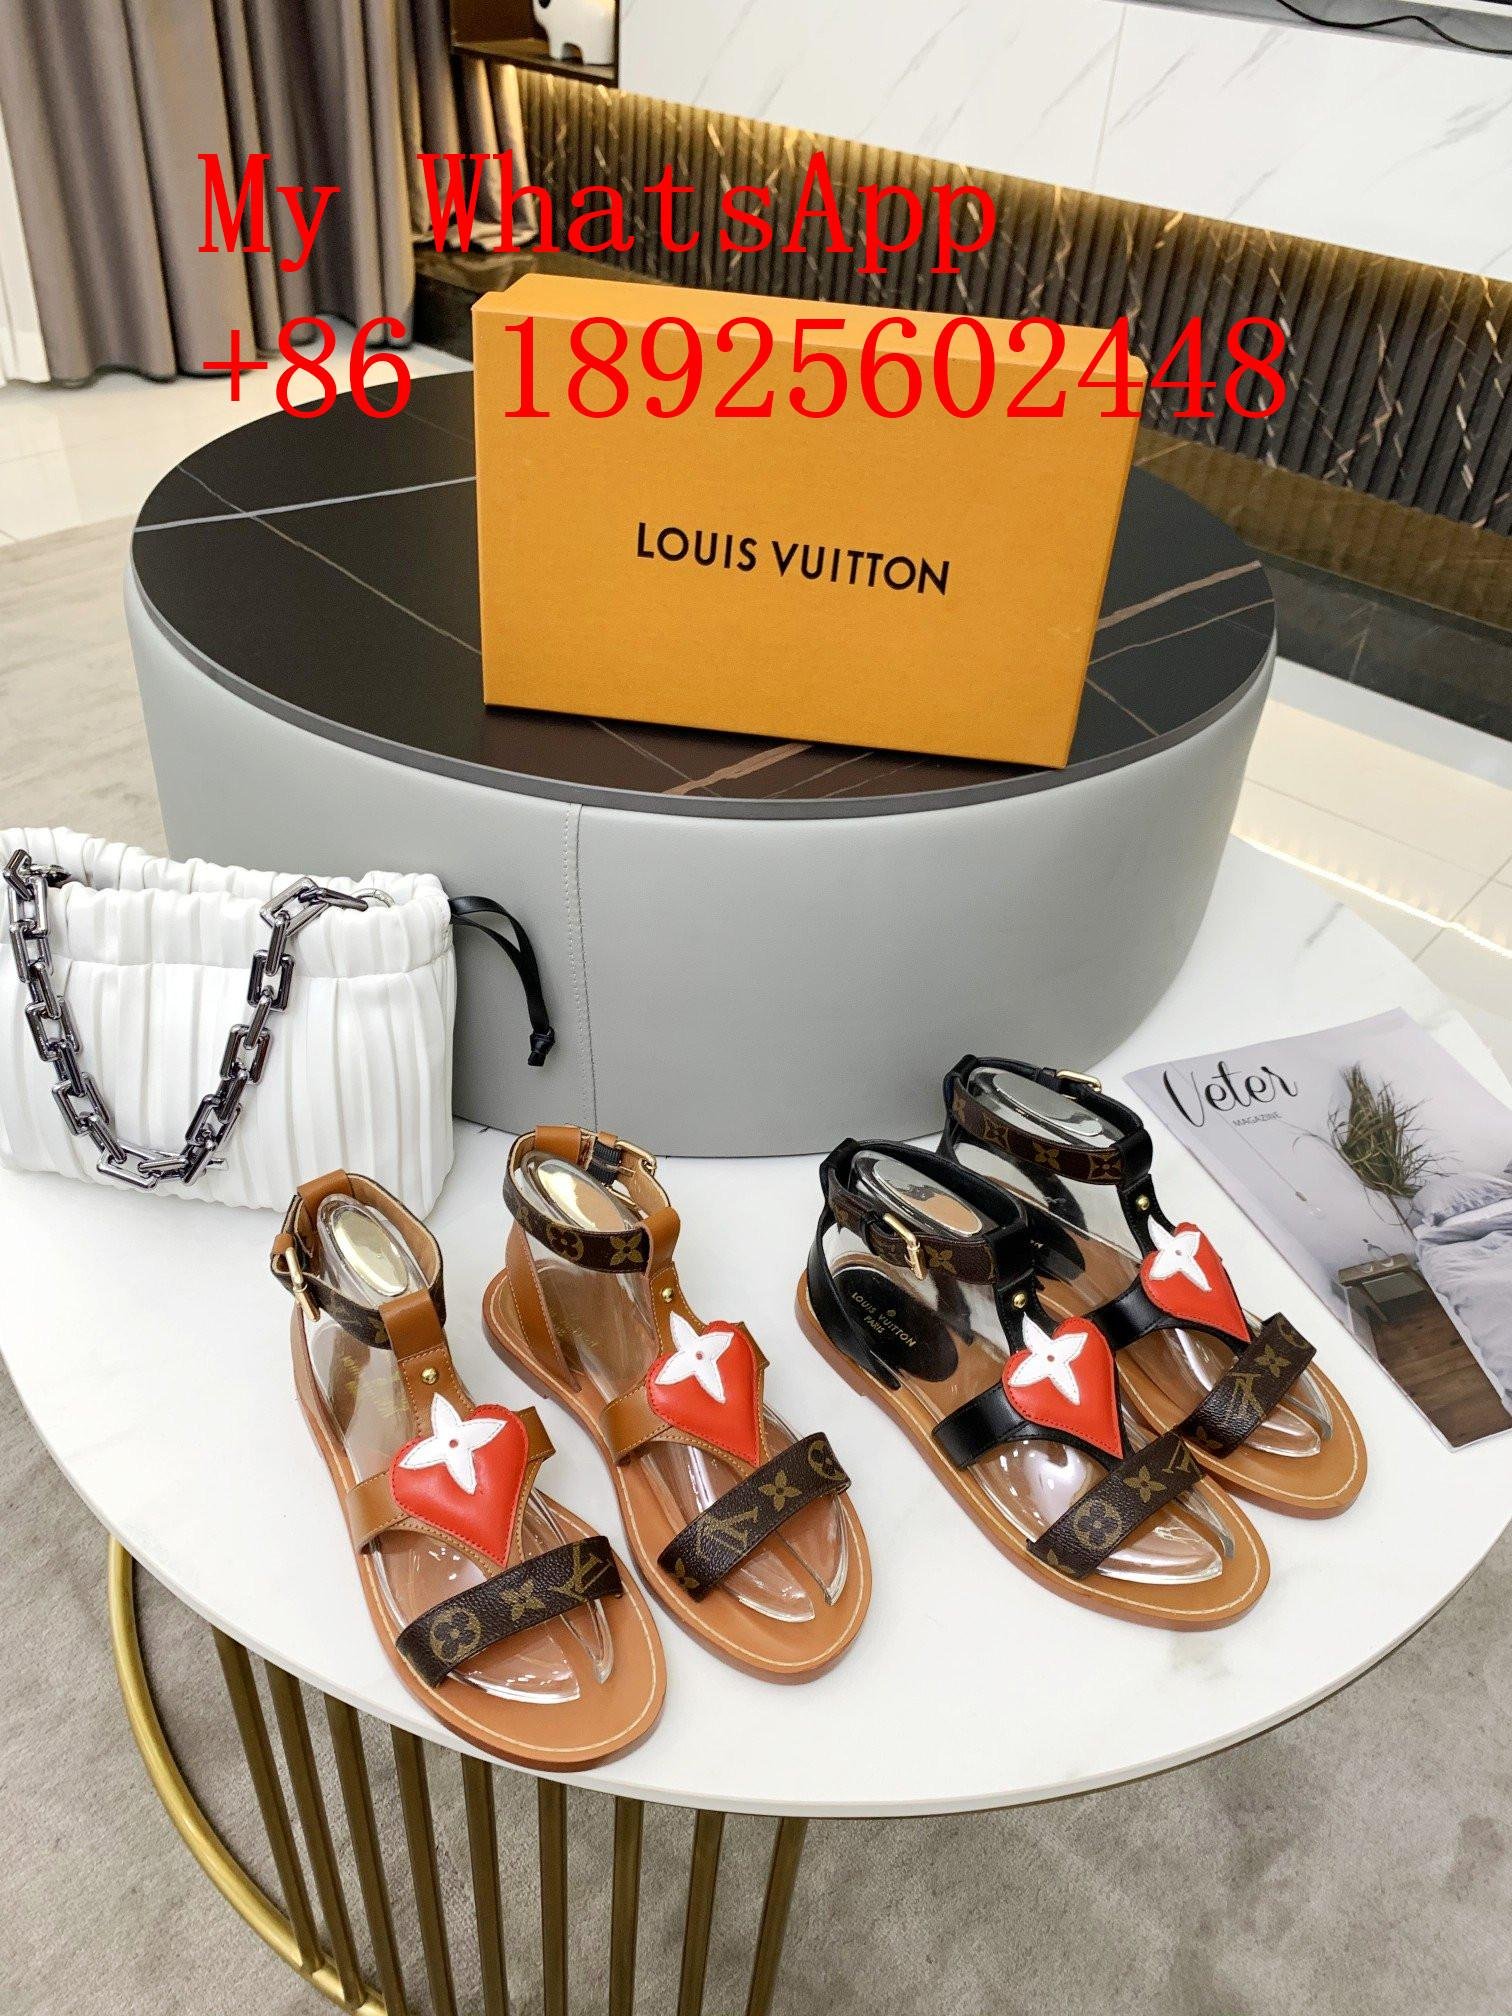 Wholesale 2021               slippers     alt sandals high quality best price 2